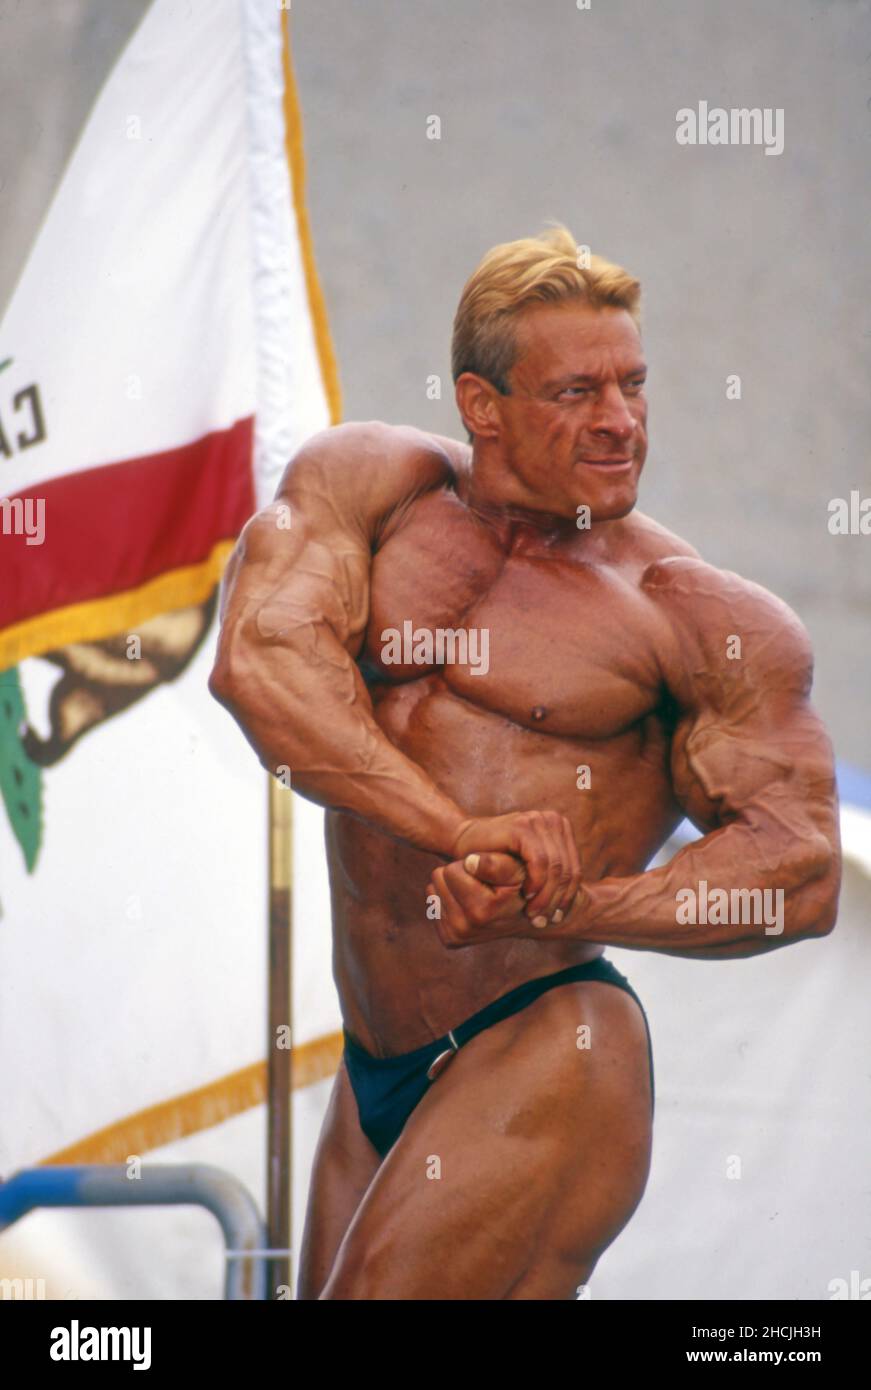 Bodybuilding competition at Muscle Beach in Venice Beach, CA Stock Photo